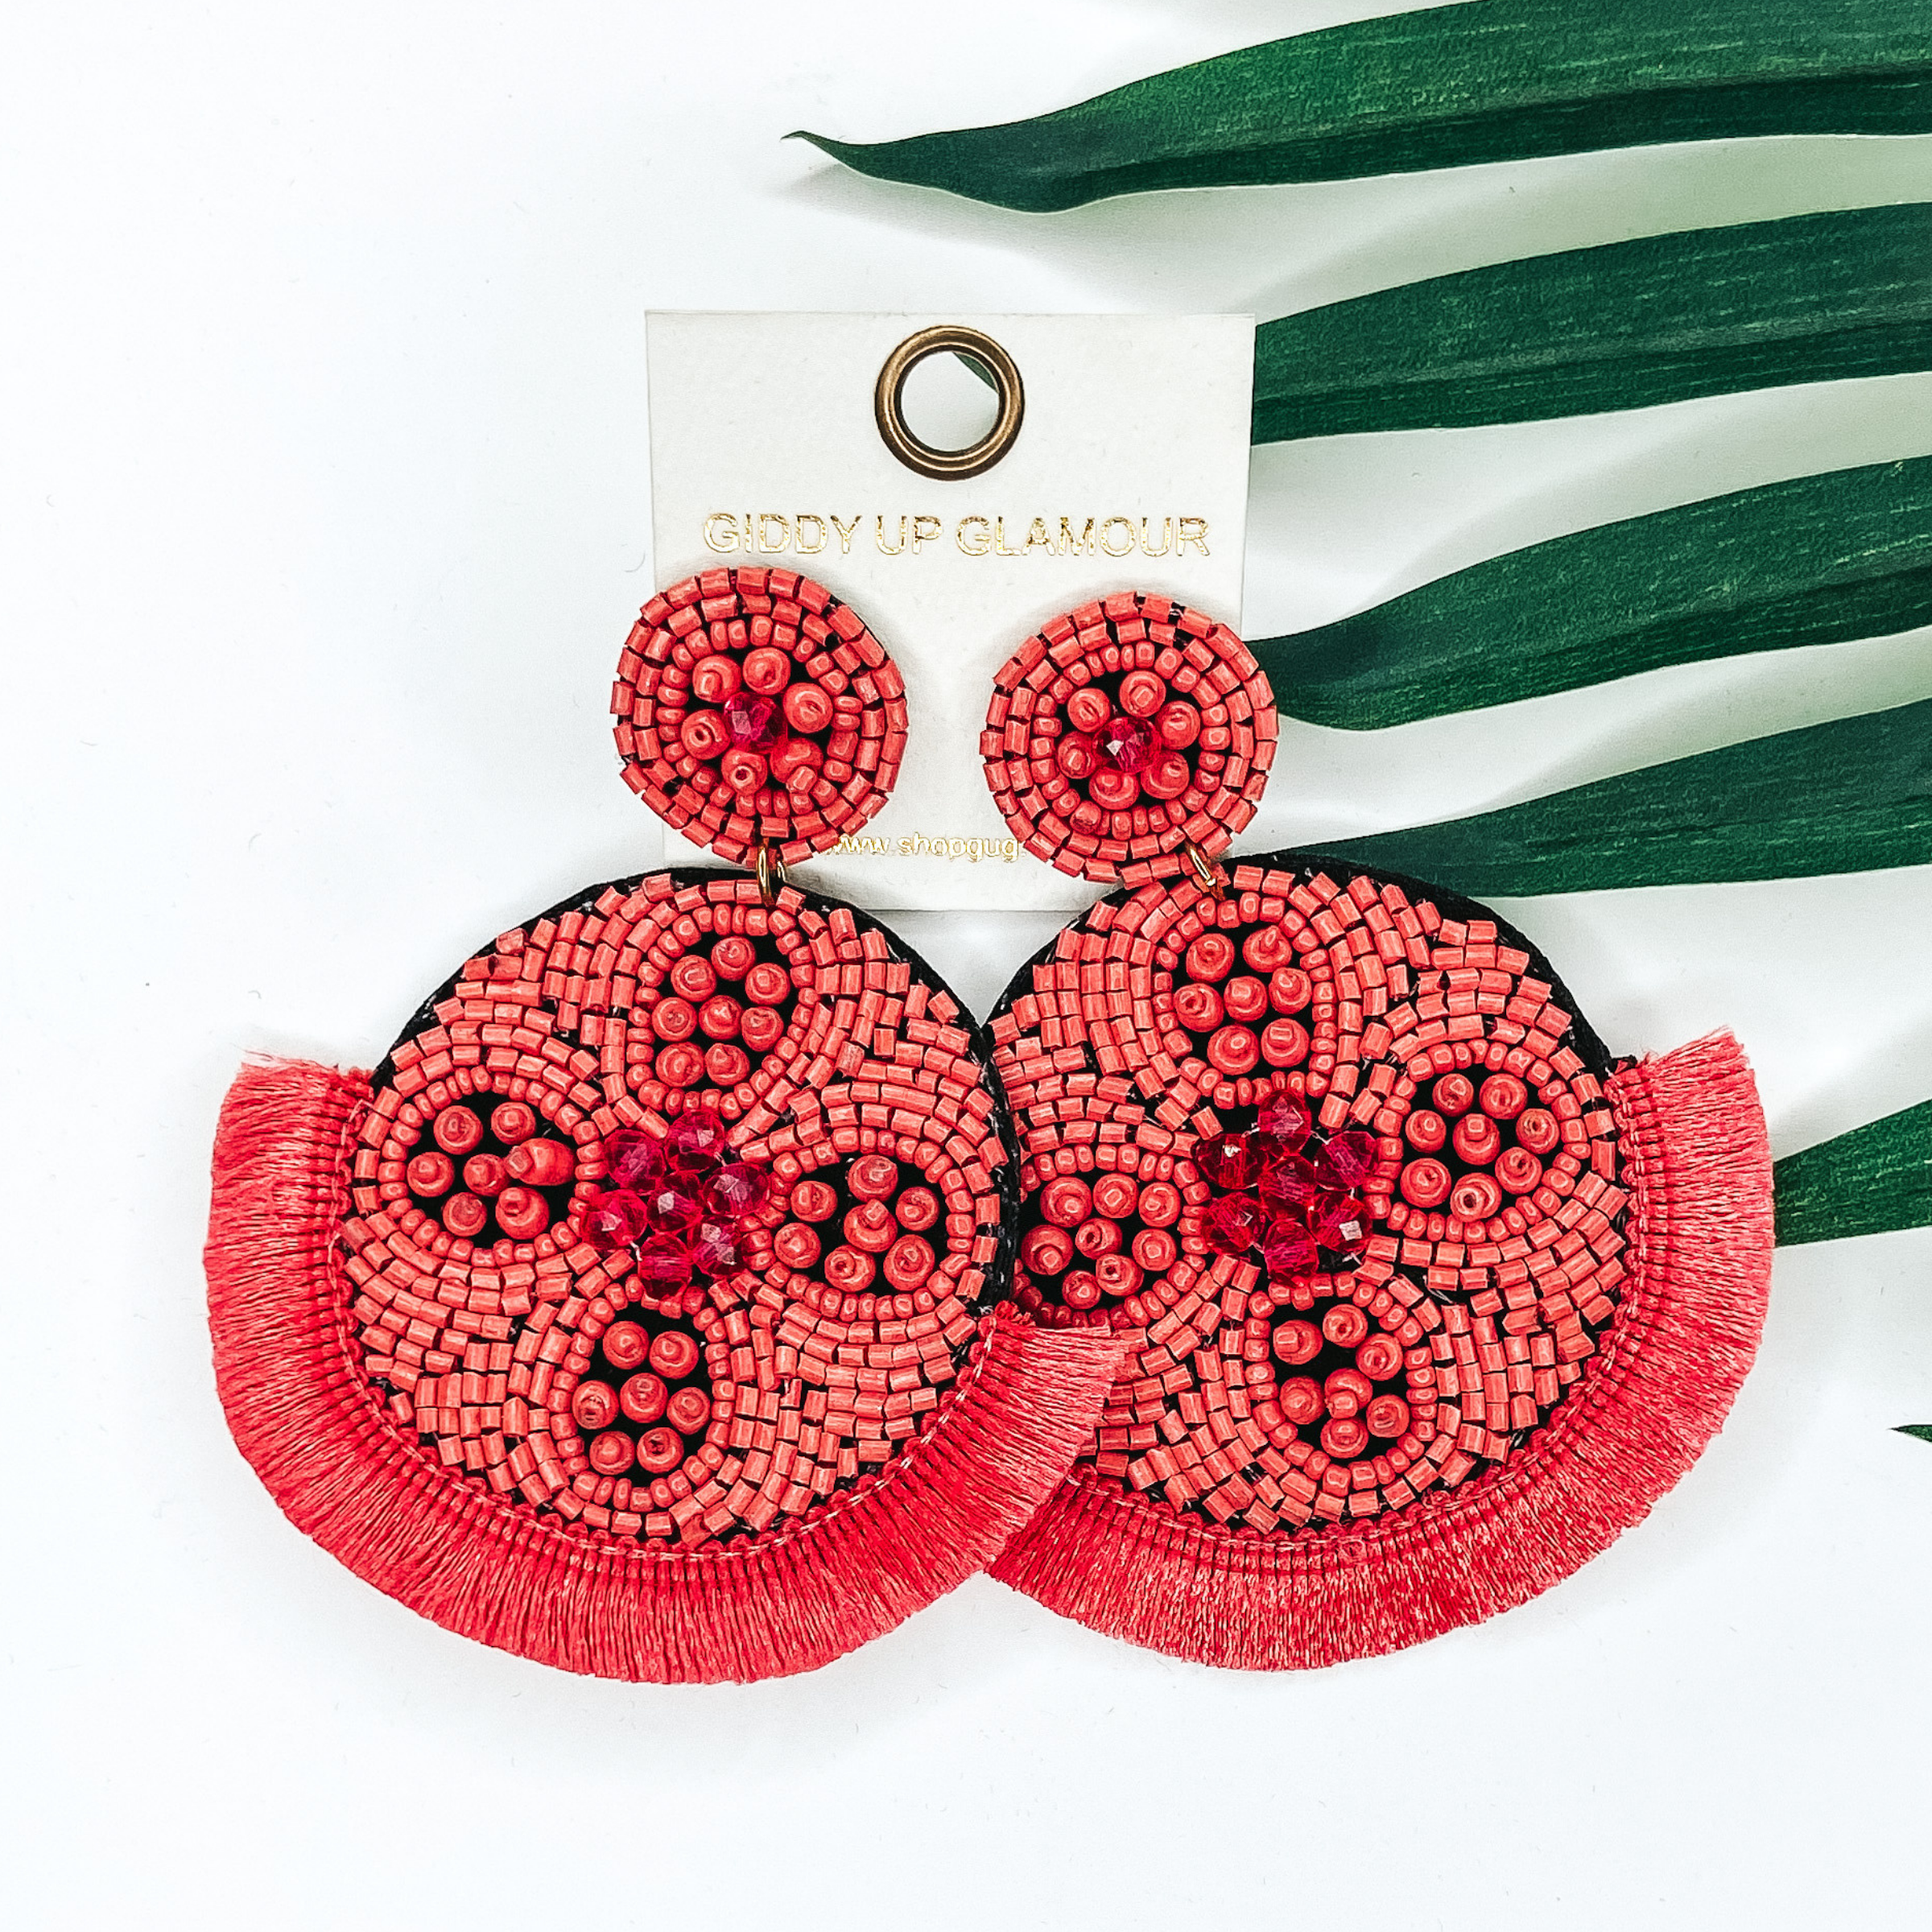 Coral beaded circle post back earrings. Hanging from the earrings are black beaded circle pendant with black fringe. These earrings are pictured on a white background with green leaves behind them.